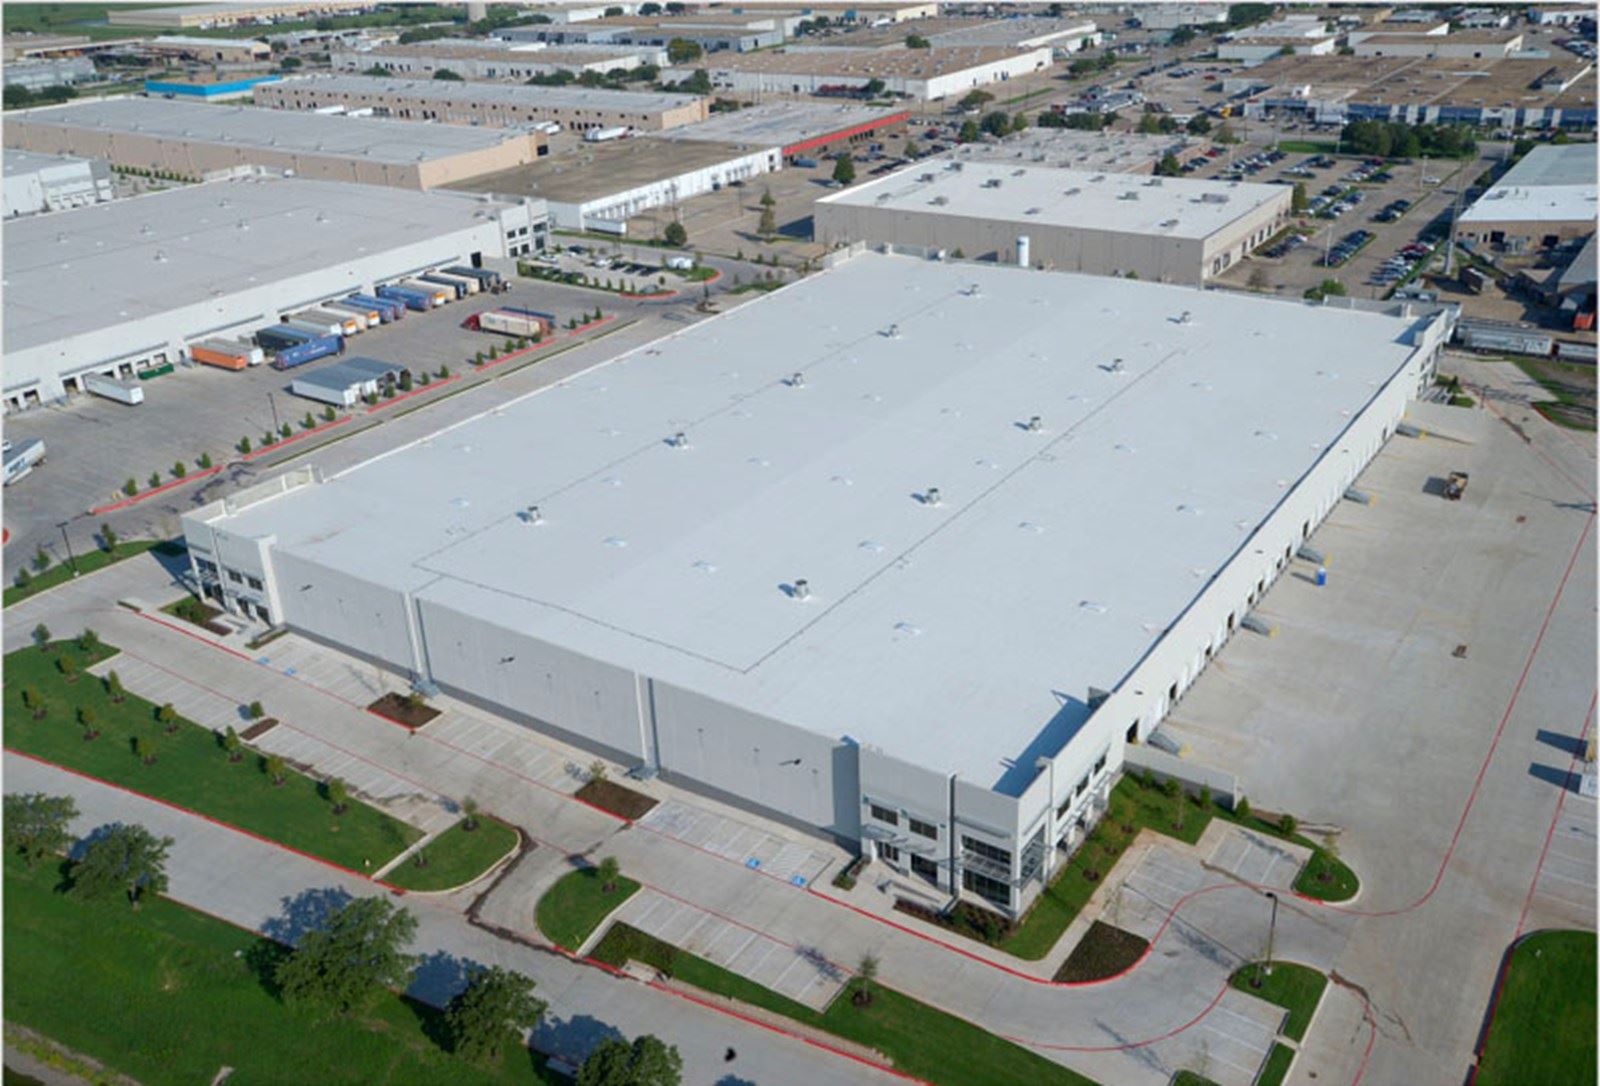 Obsido Commercial arranges 41,408-sq.-ft. industrial lease for All Star Lights